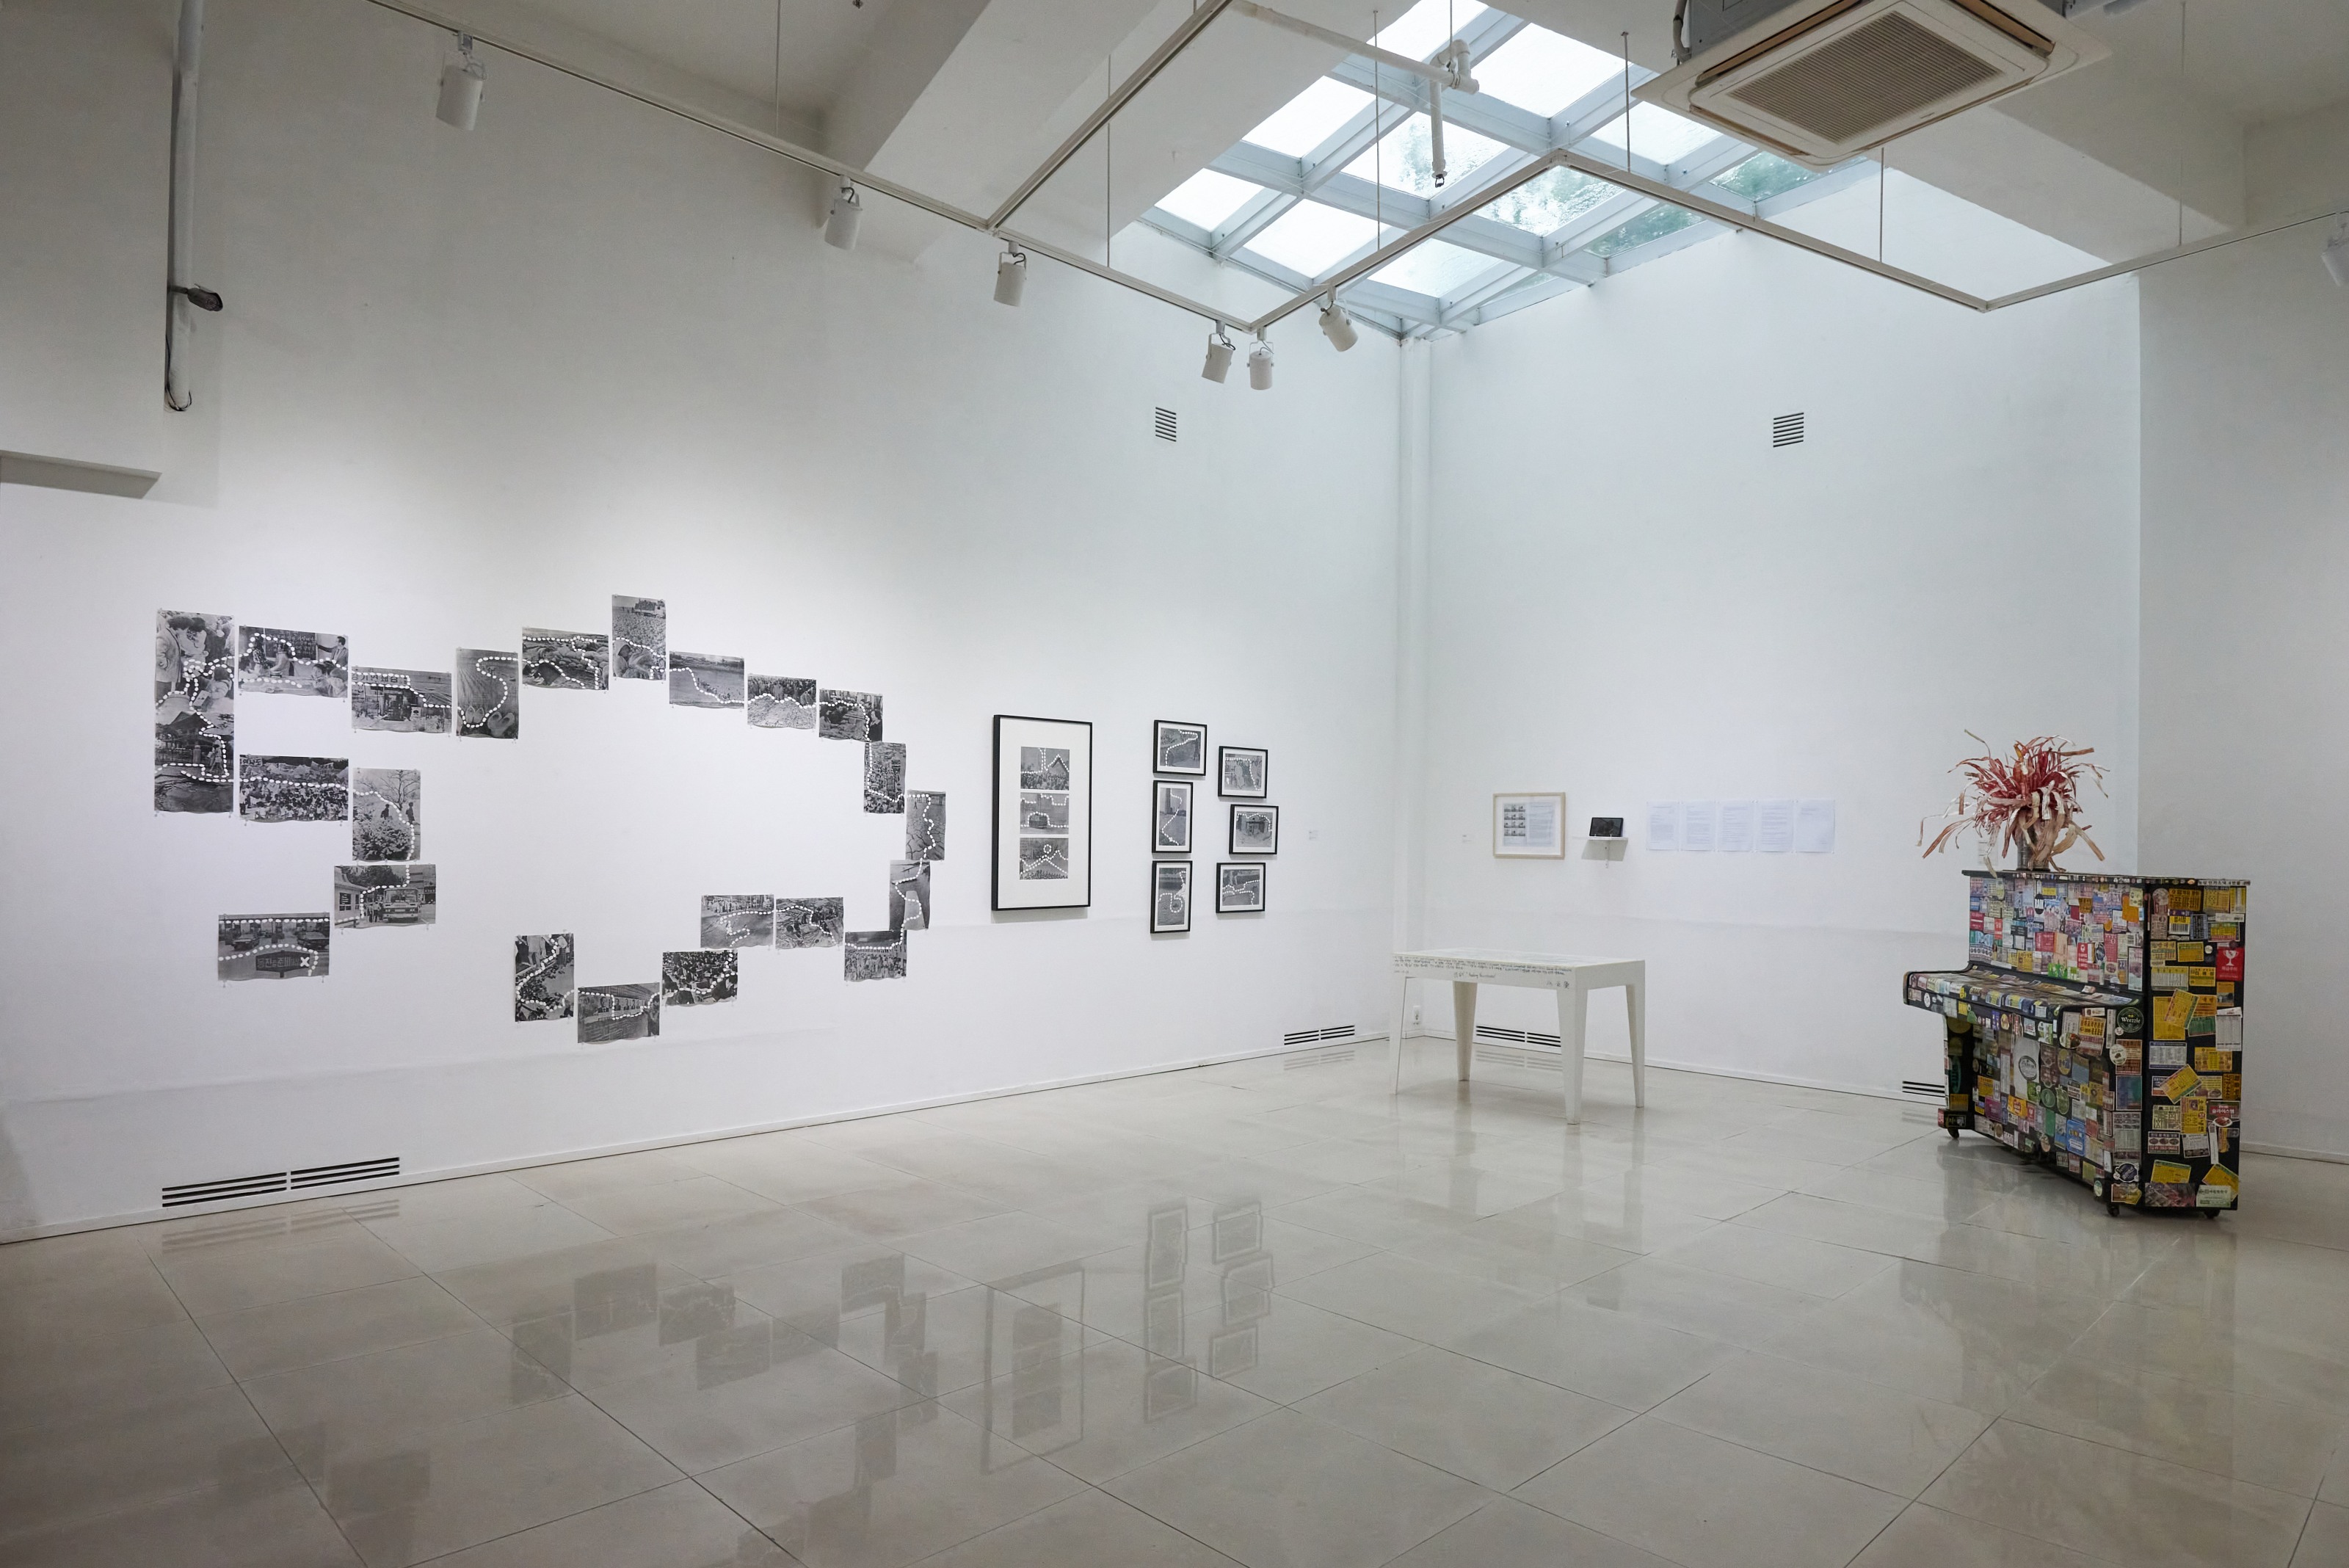 Chunk of Concept: The artistic meanderings of Sung Neung Kyung, Installation view